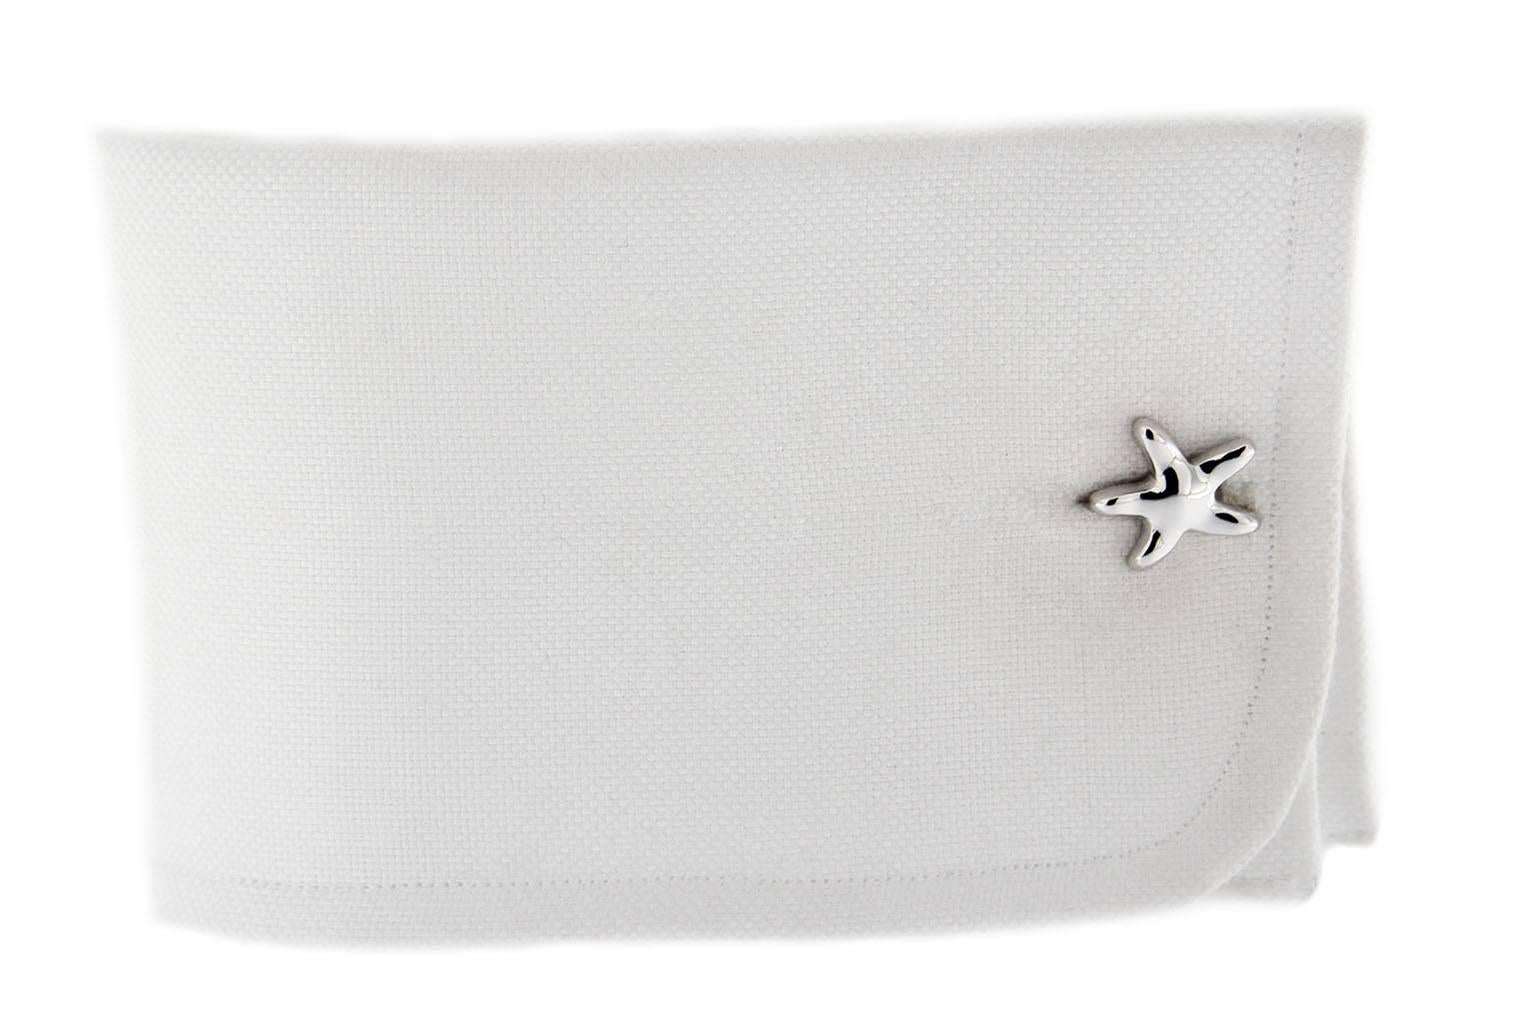 Jona design collection, hand crafted in Italy, rhodium plated sterling silver starfish cufflinks. 

Dimensions
0.63 in W x 0.50 in H
16 mm W x 13 mm H

All Jona jewelry is new and has never been previously owned or worn. Each item will arrive at